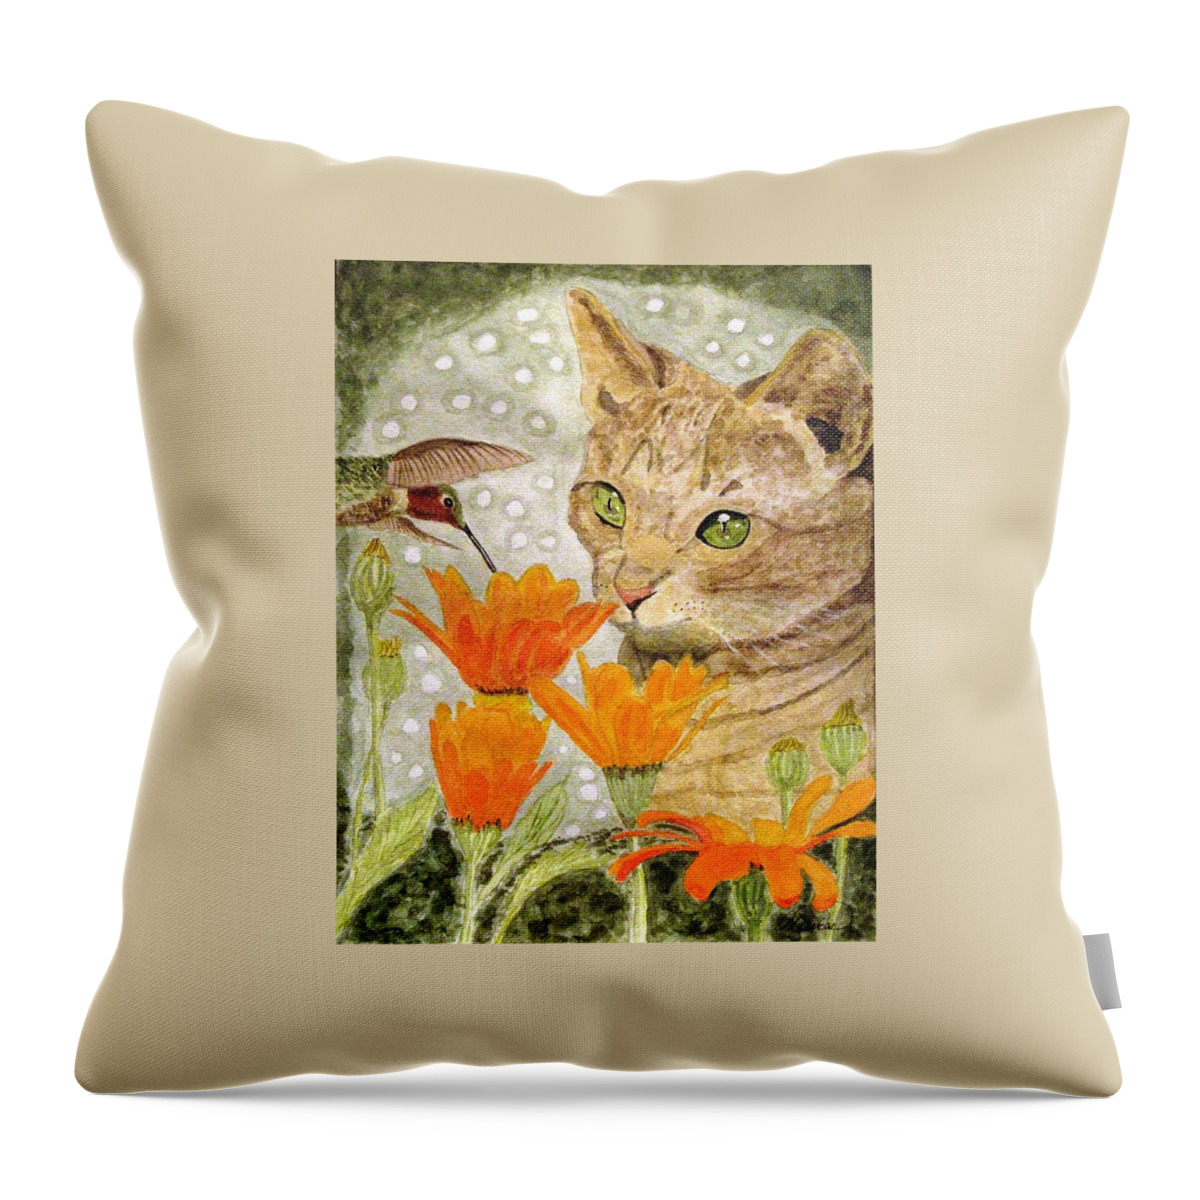 Kittens Throw Pillow featuring the painting Eye To Eye by Angela Davies